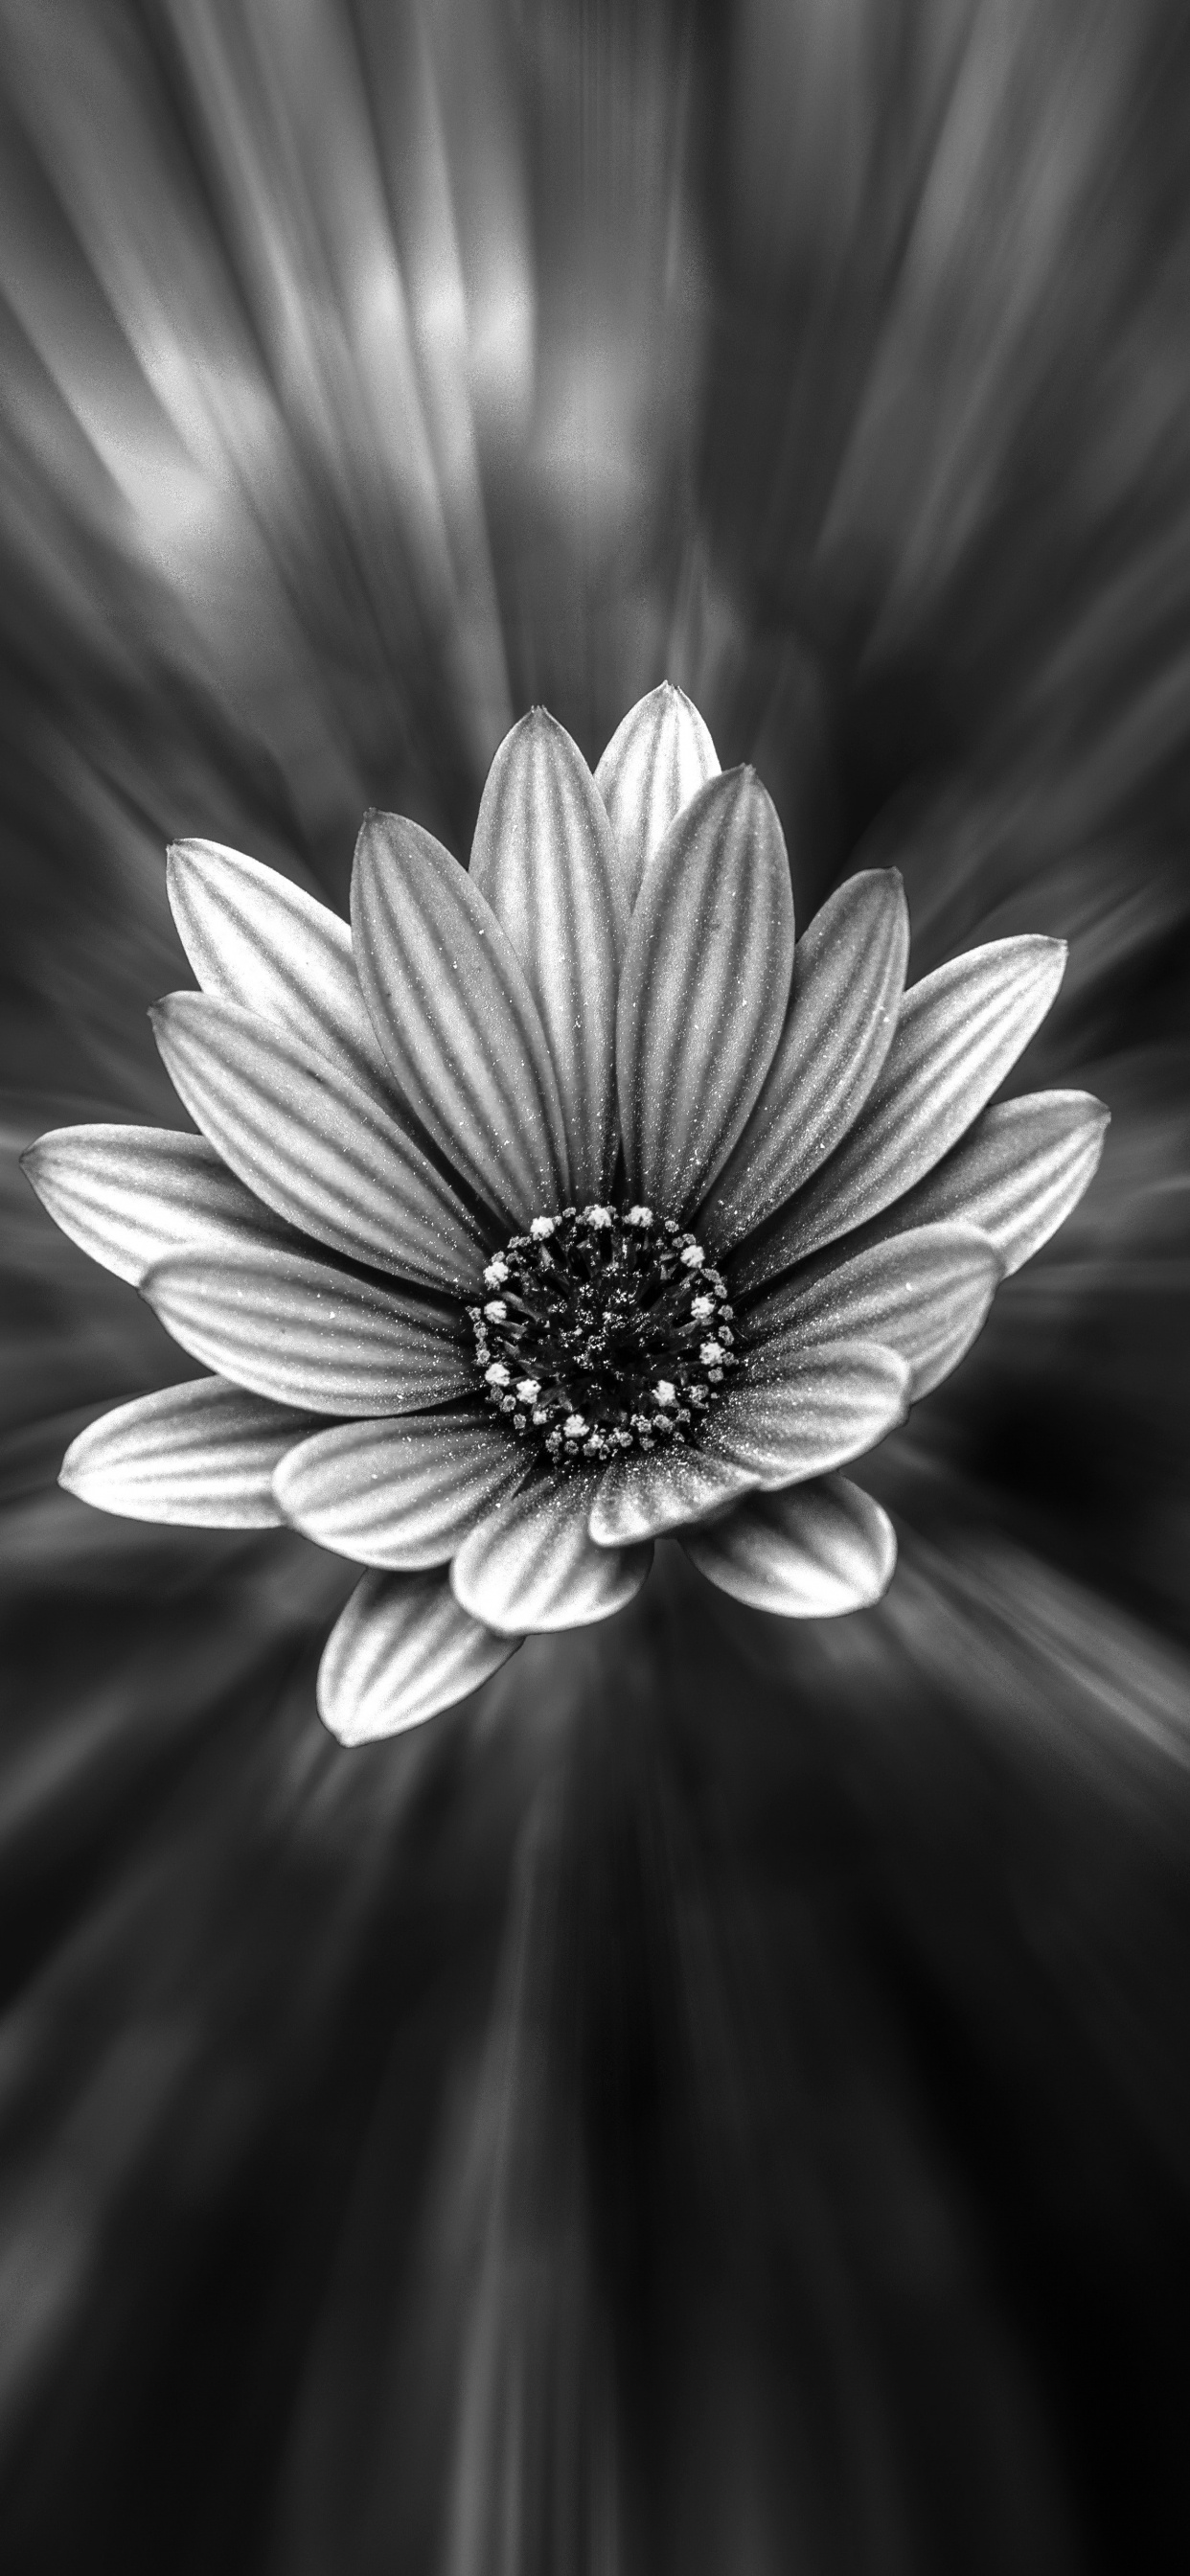 Grayscale Photo of a Flower. Wallpaper in 1242x2688 Resolution